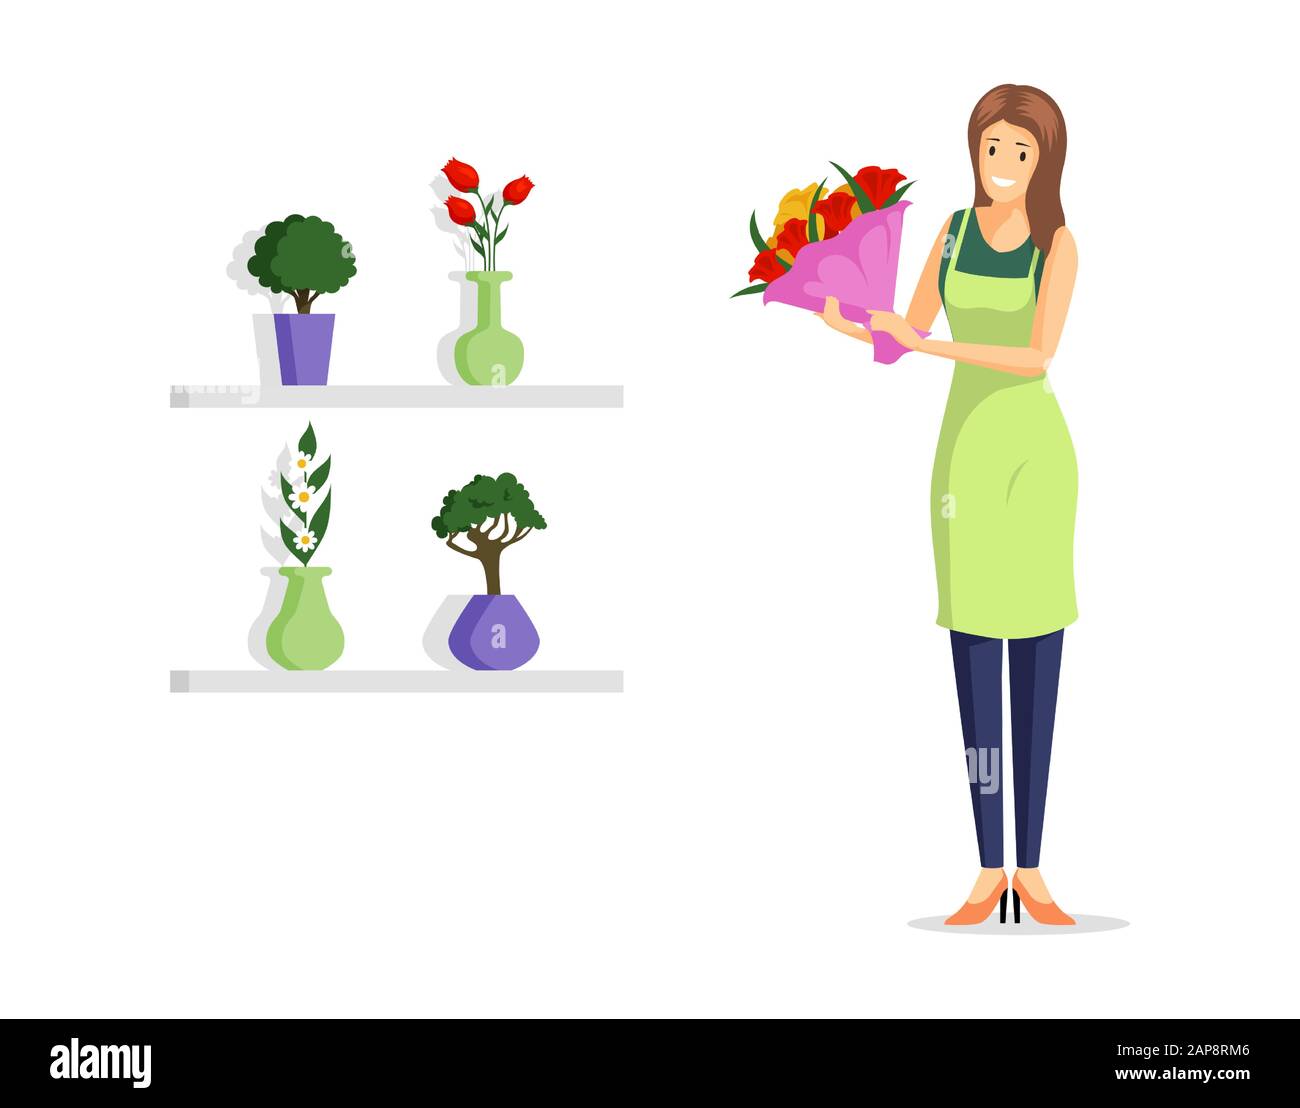 Flower shop employee flat vector illustration. Young florist in apron holding beautiful bouquet cartoon character. Natural flowers, decorative home plants retail service, floristry design element Stock Vector